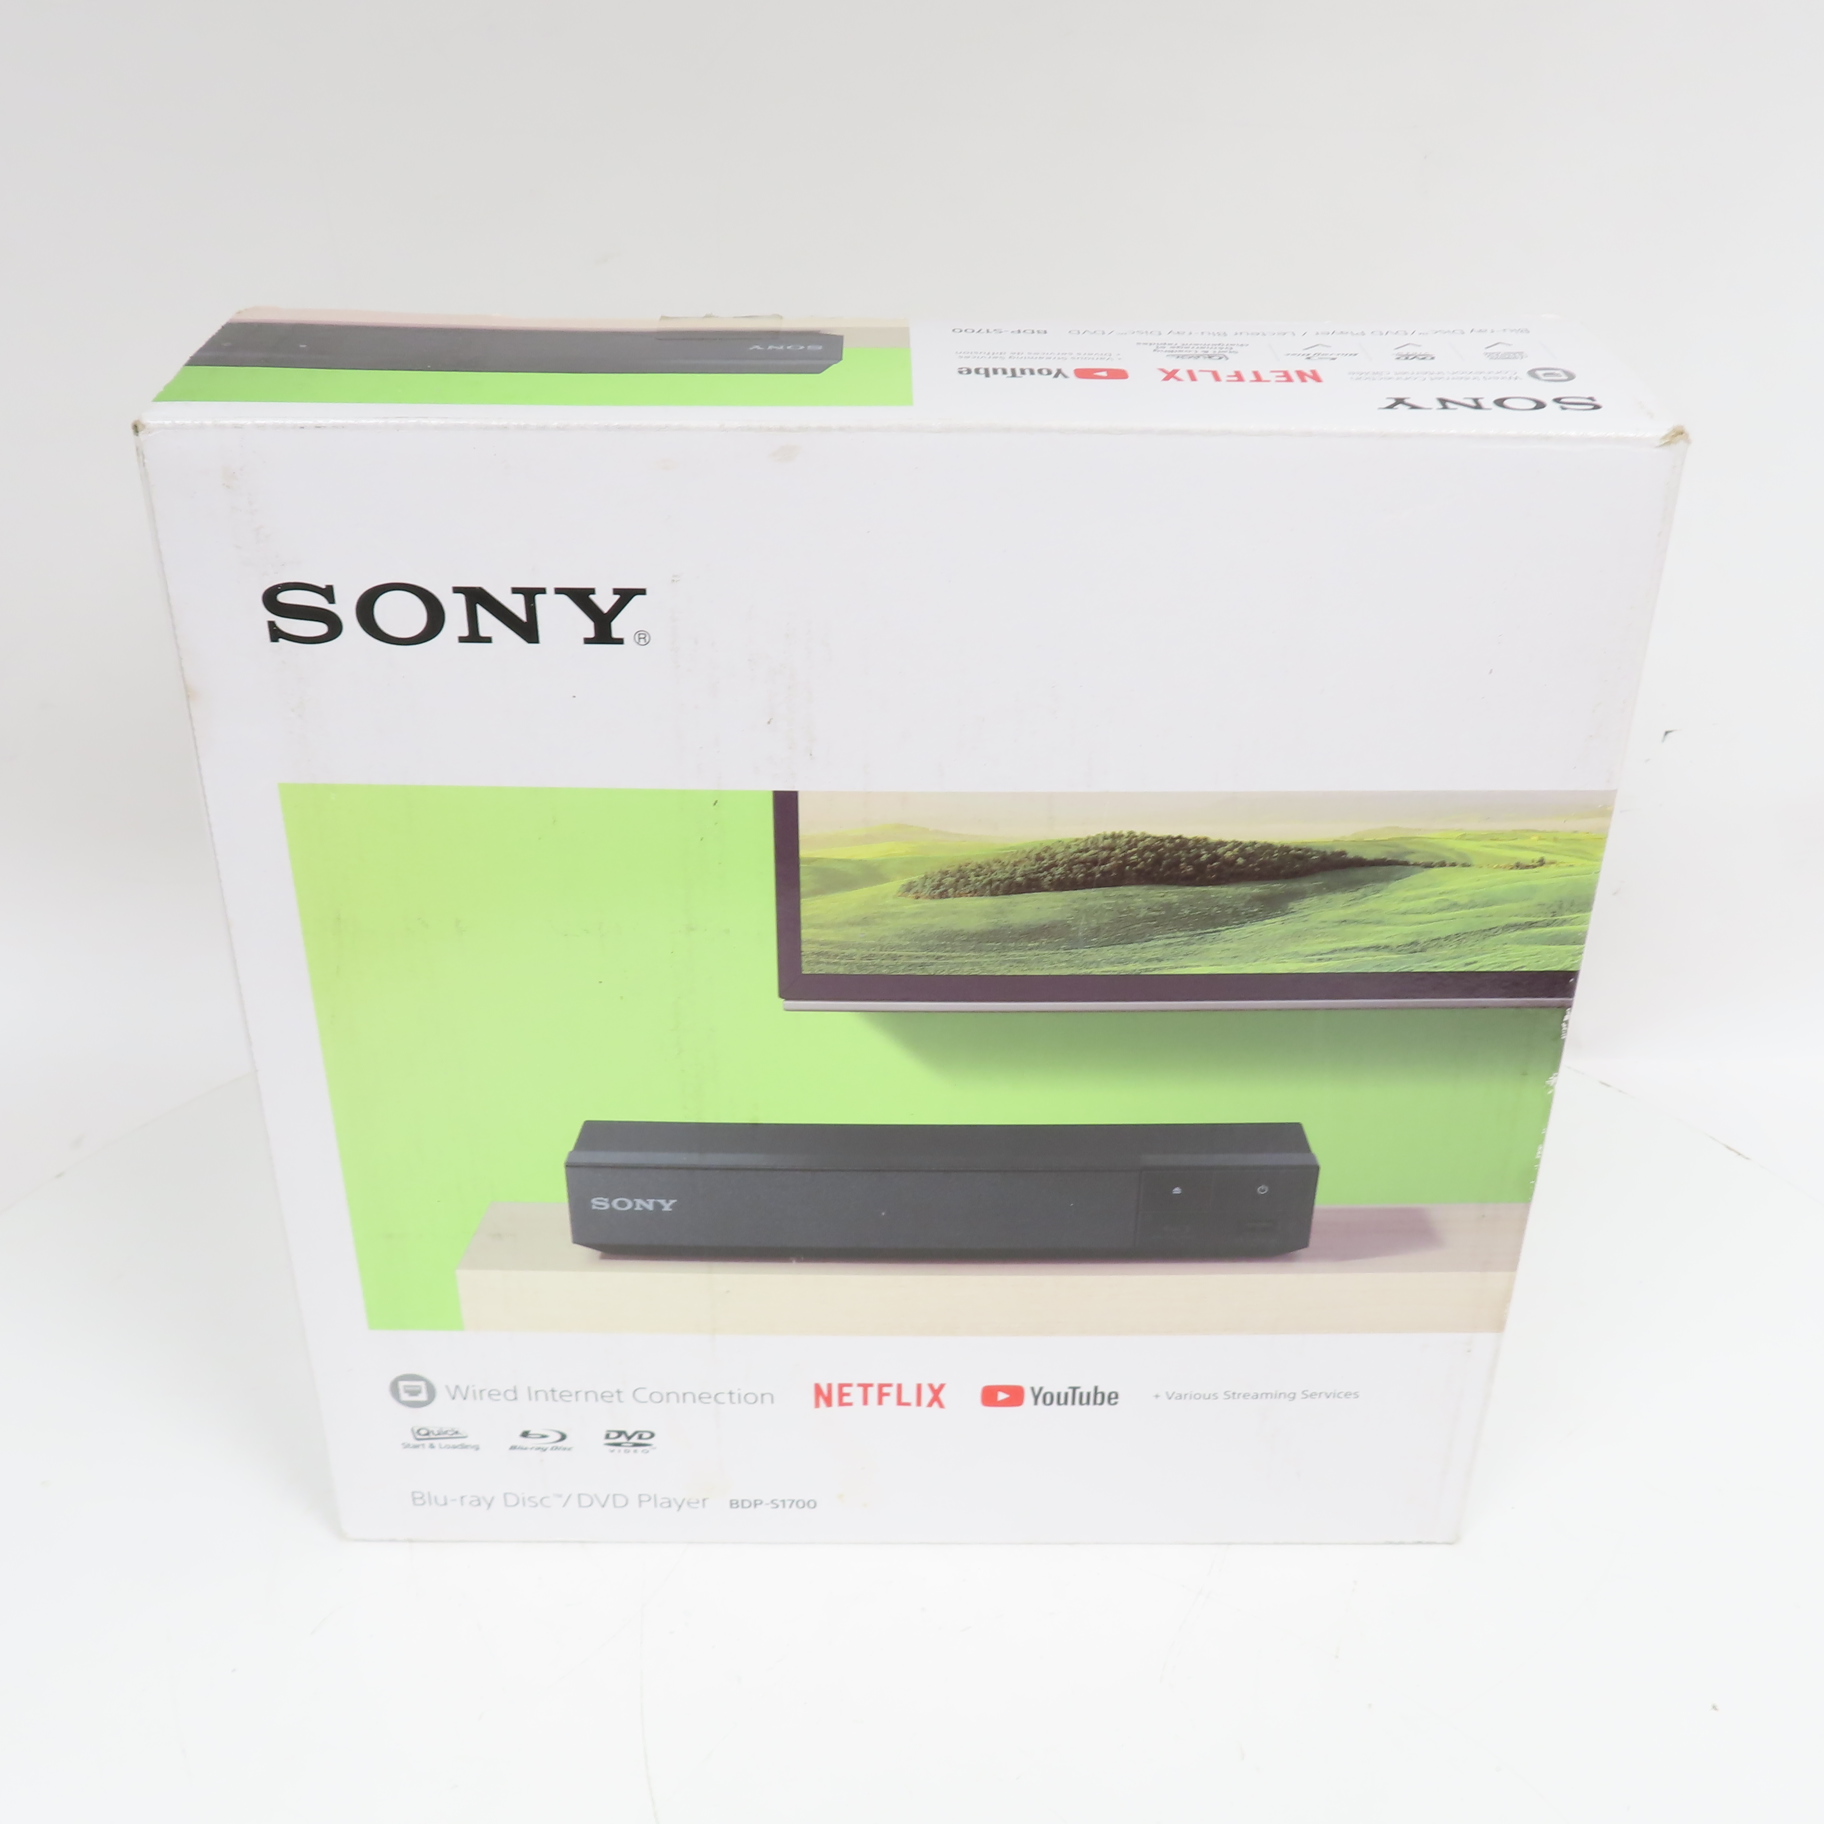 Connected Blu-Ray/DVD BDP-S1700 Player (In Wi-Fi Sony Box)